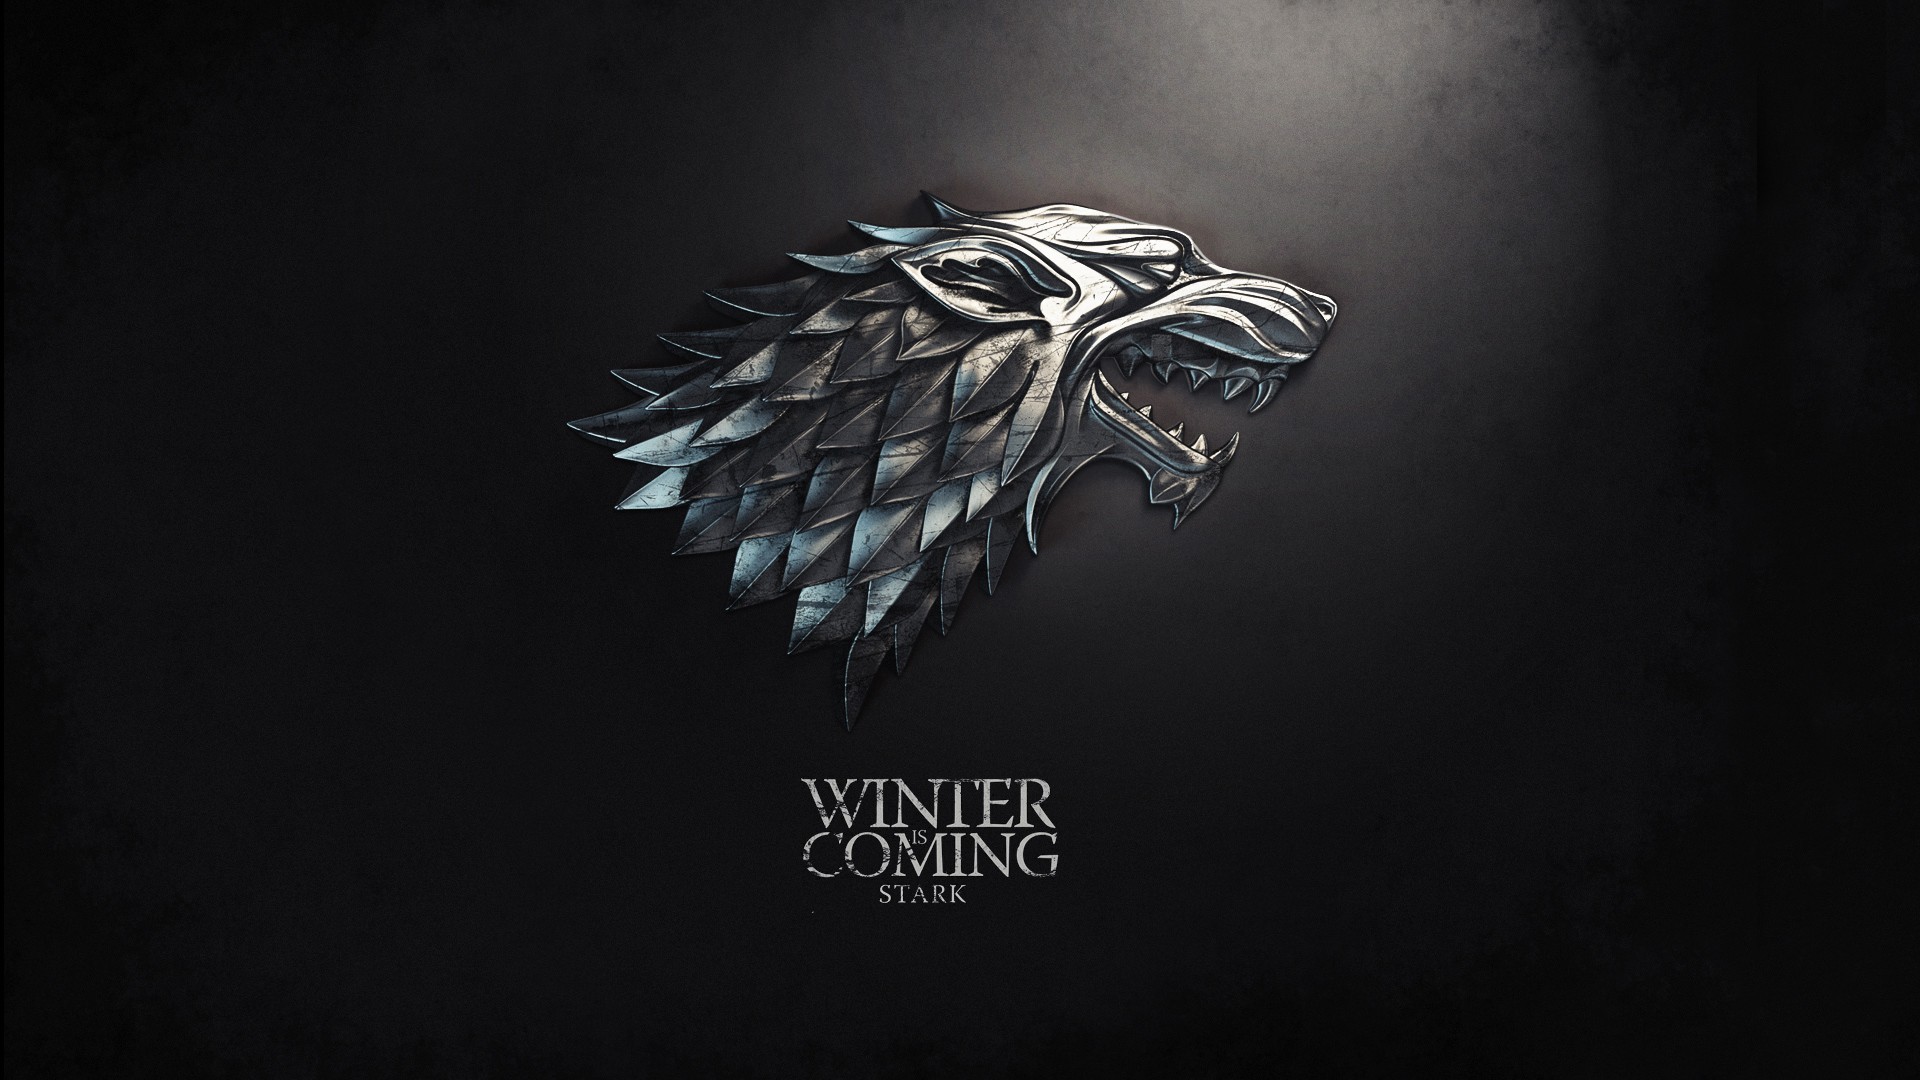 A Song Of Ice And Fire, Digital Art, Game Of Thrones, Direwolf, Winter Is Coming, Sigils, Simple Background, House Stark Wallpaper